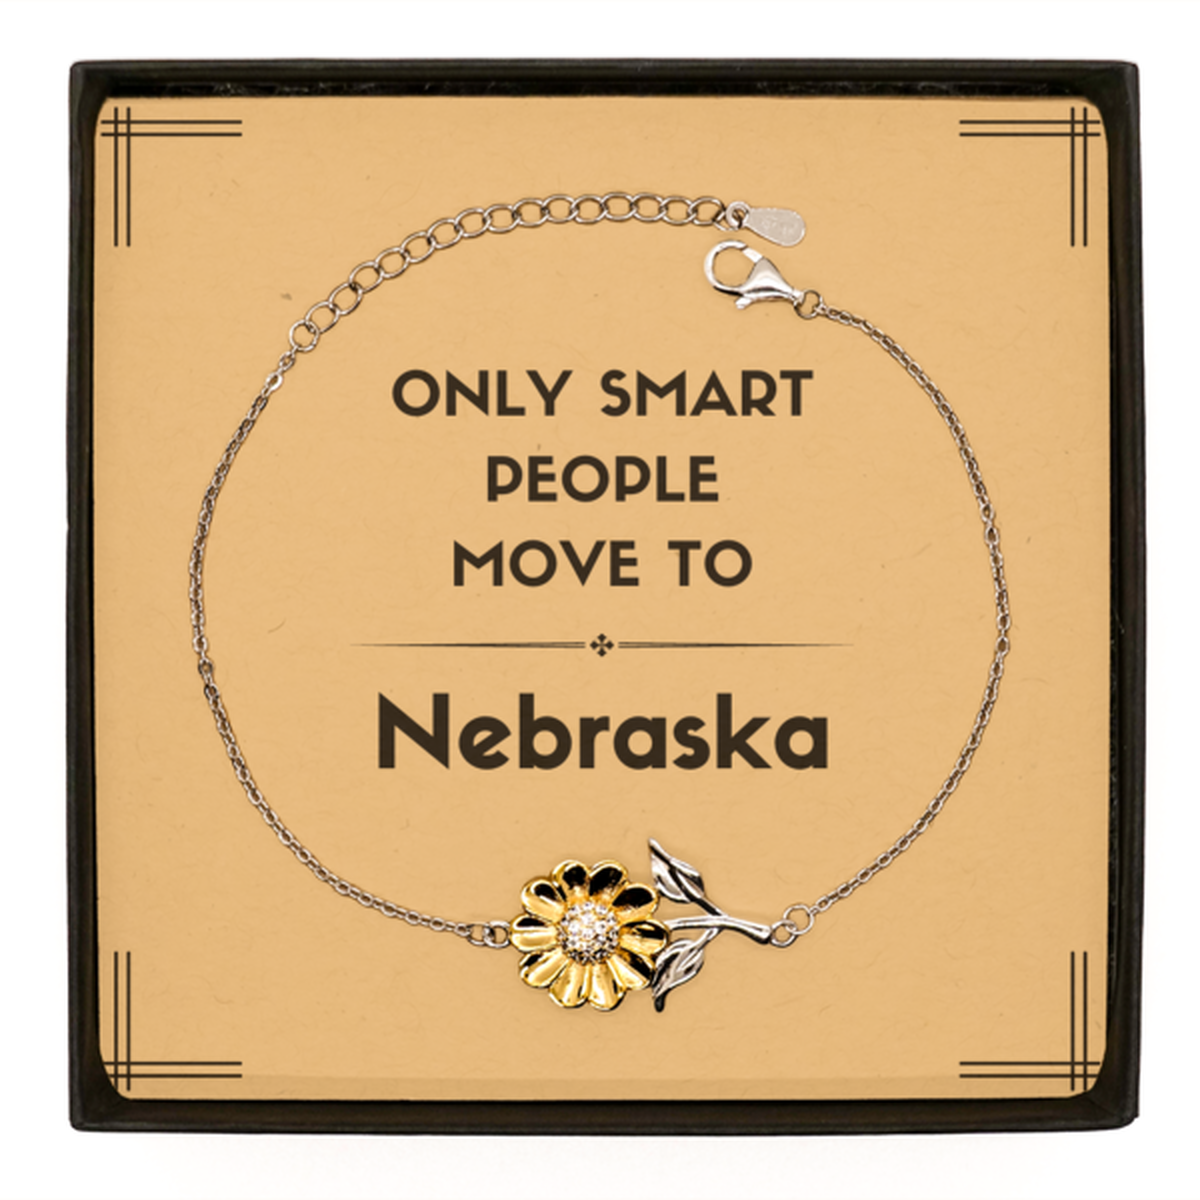 Only smart people move to Nebraska Sunflower Bracelet, Message Card Gifts For Nebraska, Move to Nebraska Gifts for Friends Coworker Funny Saying Quote